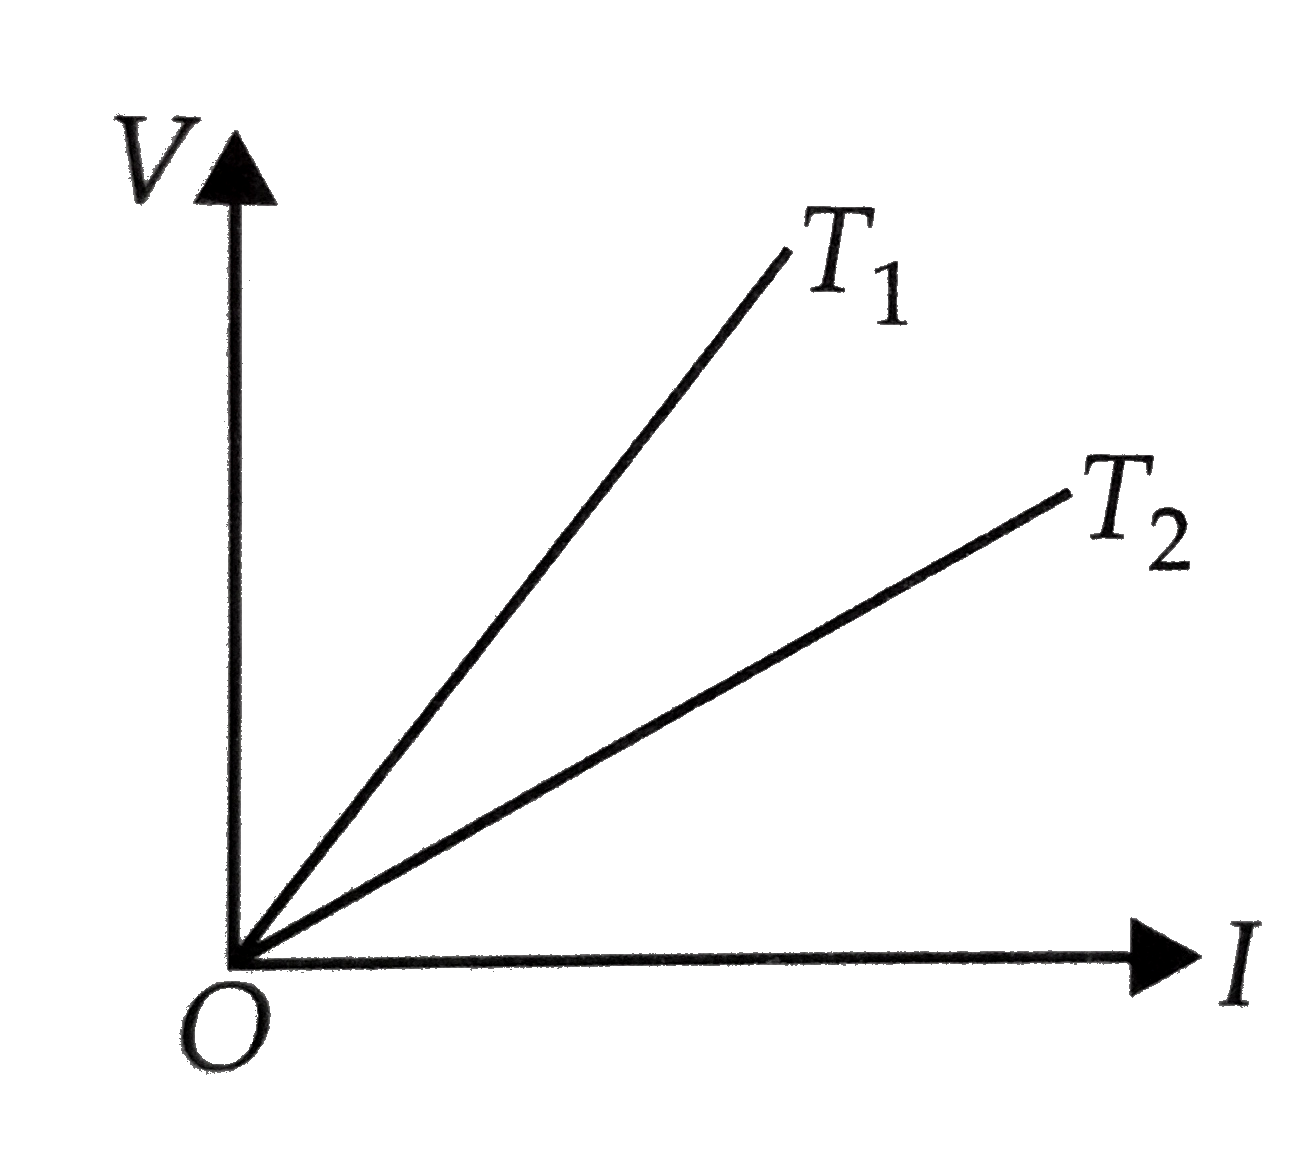 The voltage V and current I v graphs for a conductor at two different temperatures T(1) and T(2) are shown in the figure. The relation between T(1) and T(2) is